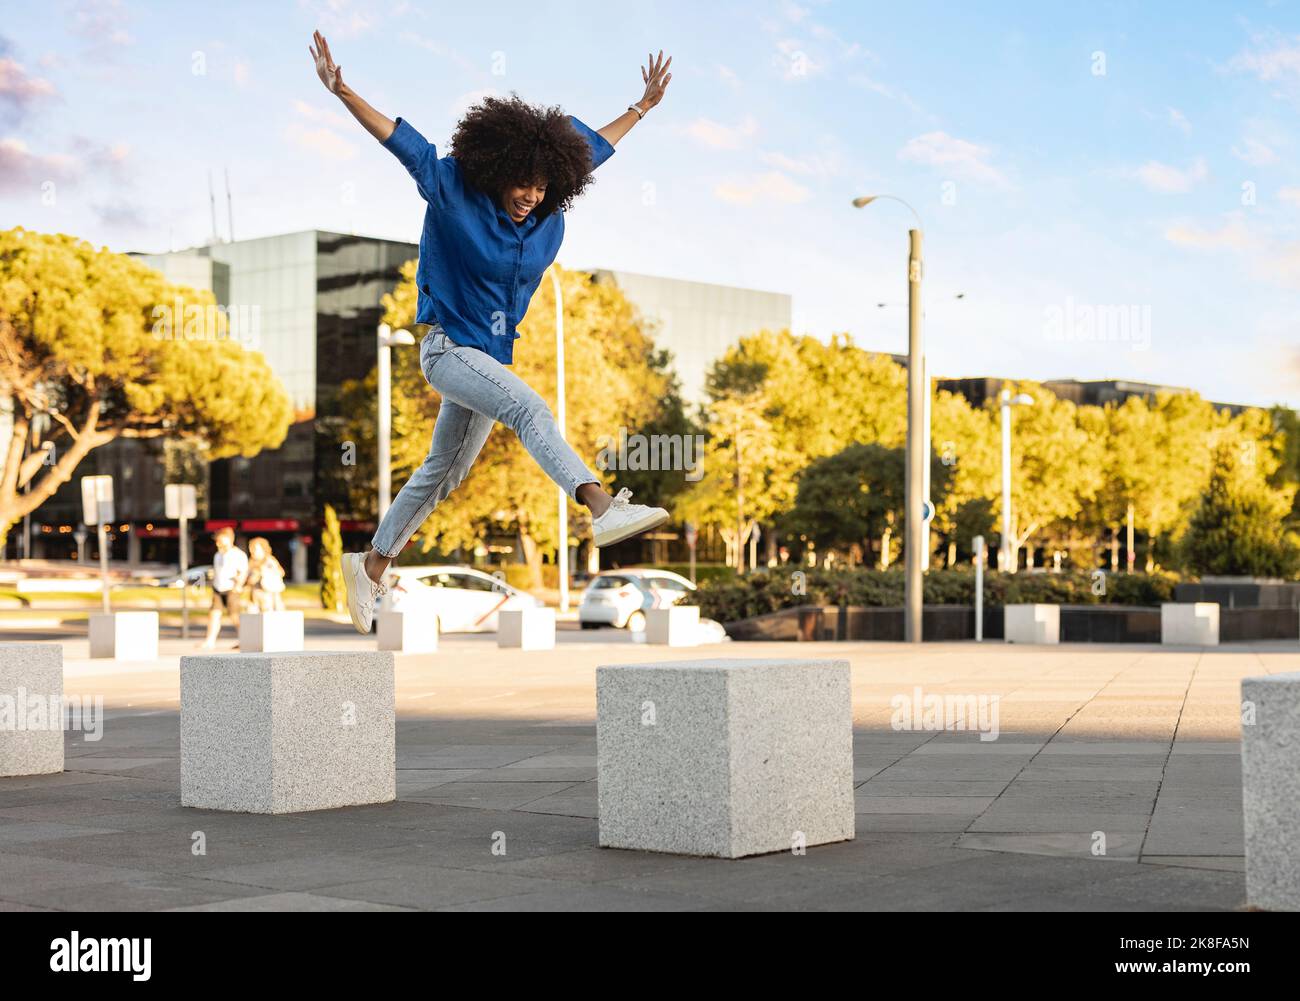 Happy woman with arms raised jumping on concrete block Stock Photo